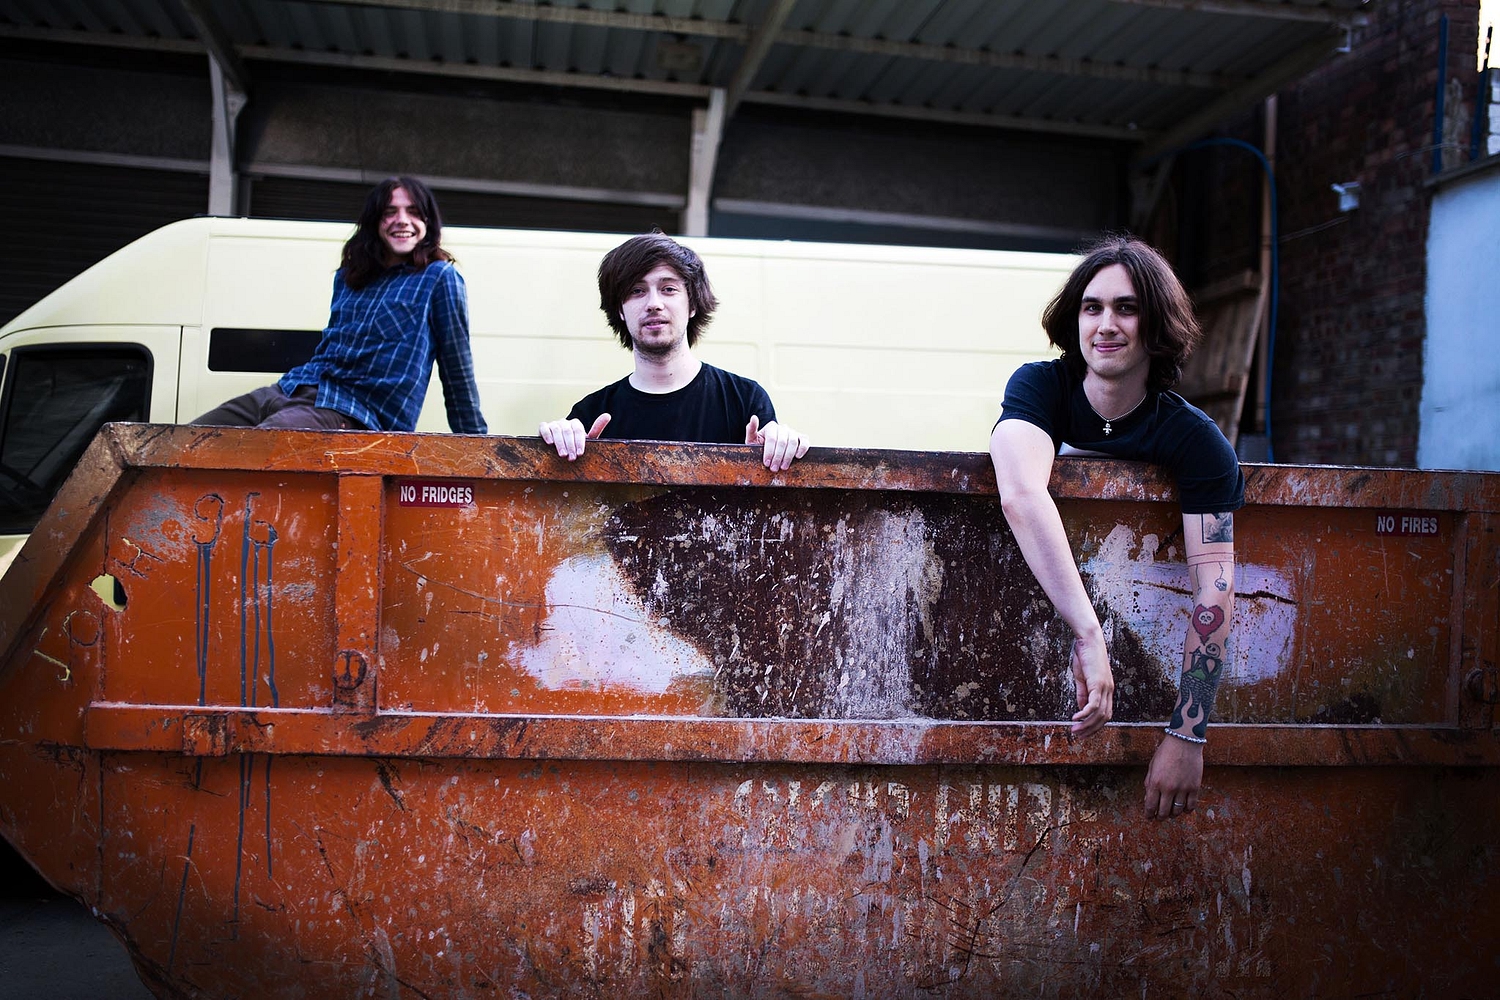 The Wytches: “I hated being in the audience, I just wanted to be onstage”